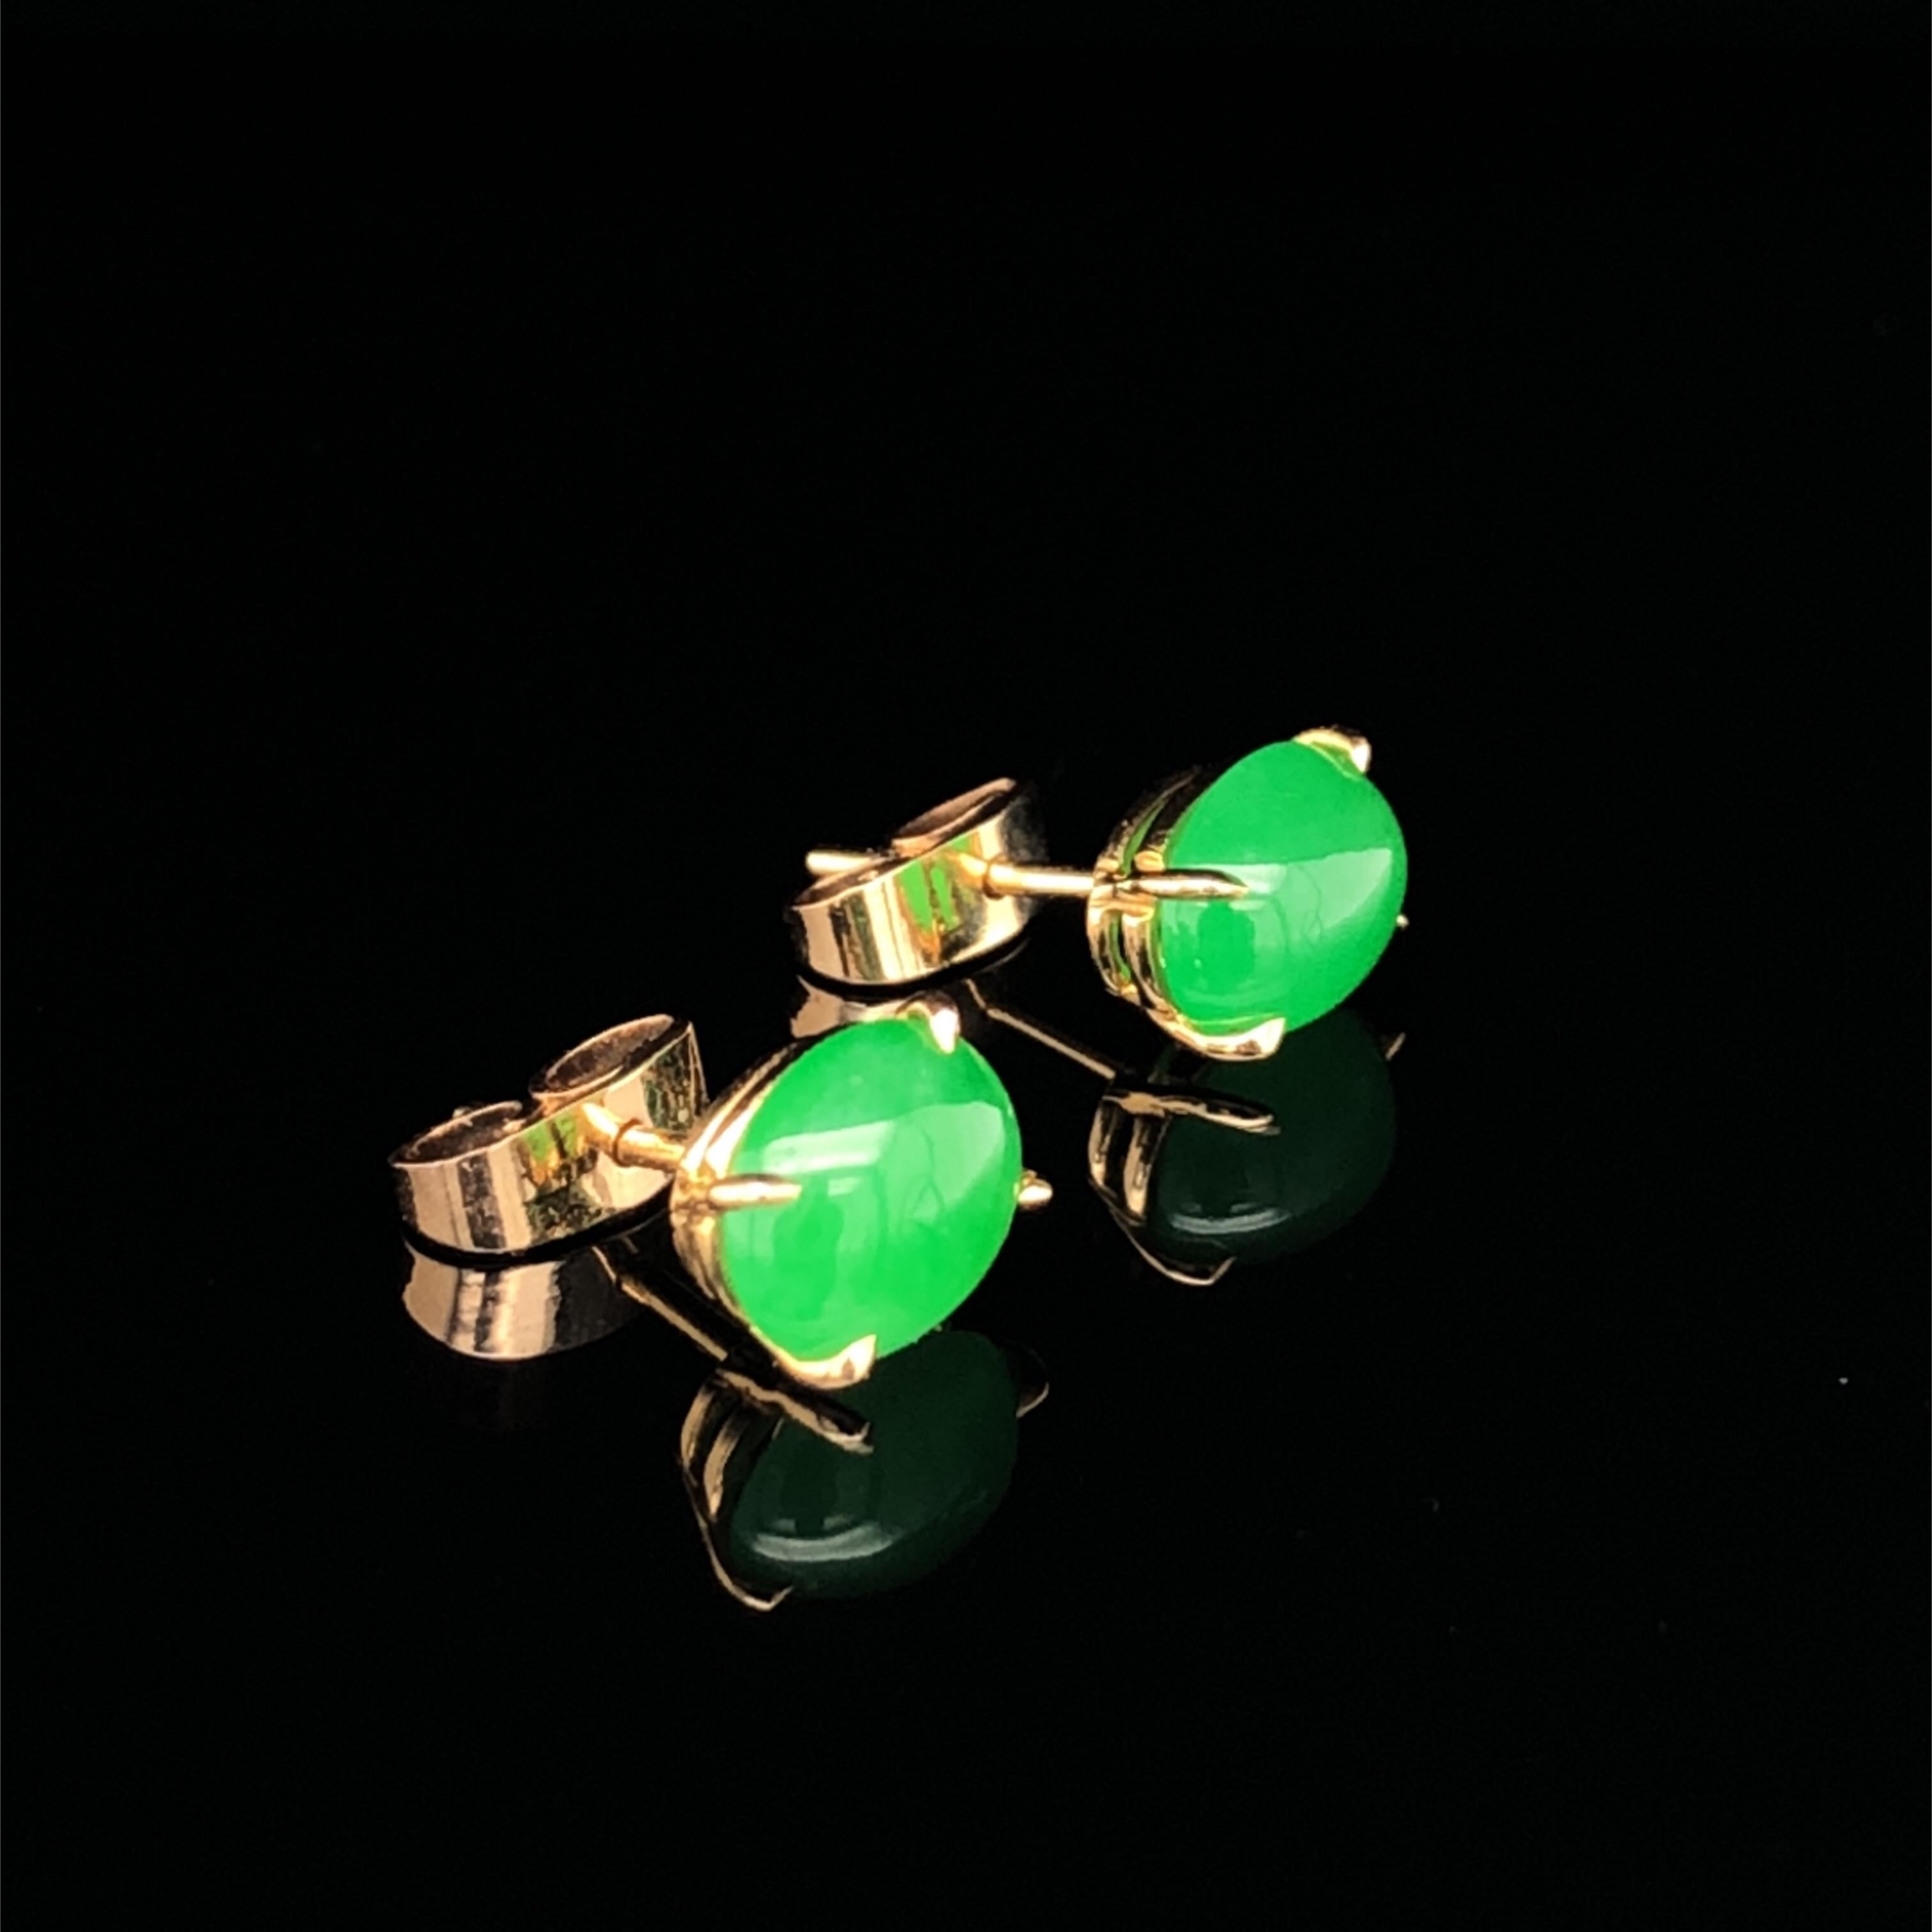 Oscar Heyman 18kt yellow gold four prong stud earrings with 2.72cts of gorgeous jade. It is stamped with the makers mark, 18K, and serial number 706762.

Oscar Heyman was founded in 1912 and became known as the 'Jewelers' Jeweler'® for creating